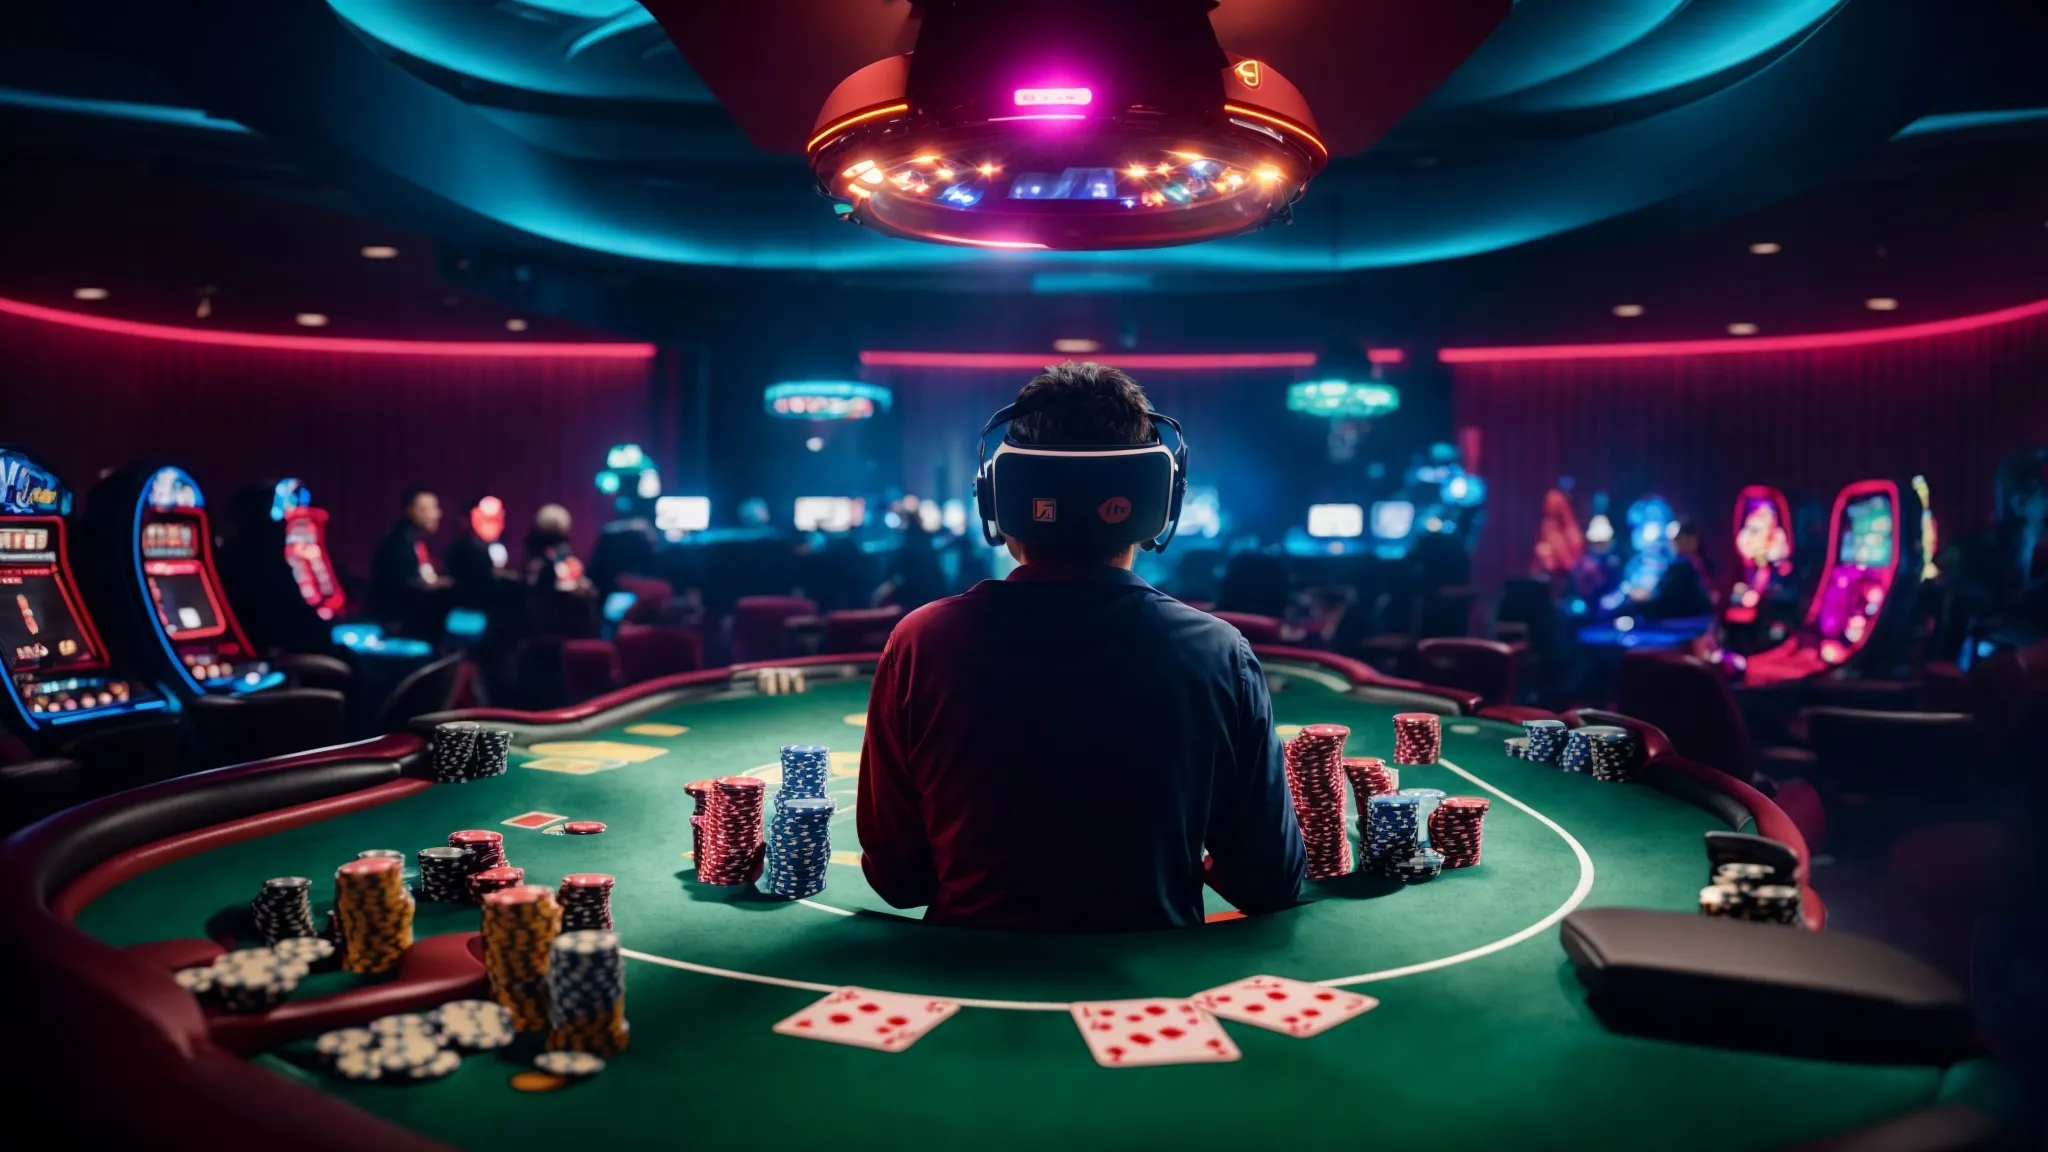 a player sits enveloped in a hi-tech vr headset, absorbed in a vibrant and expansive virtual poker room where avatars gather around a glowing, digital poker table.